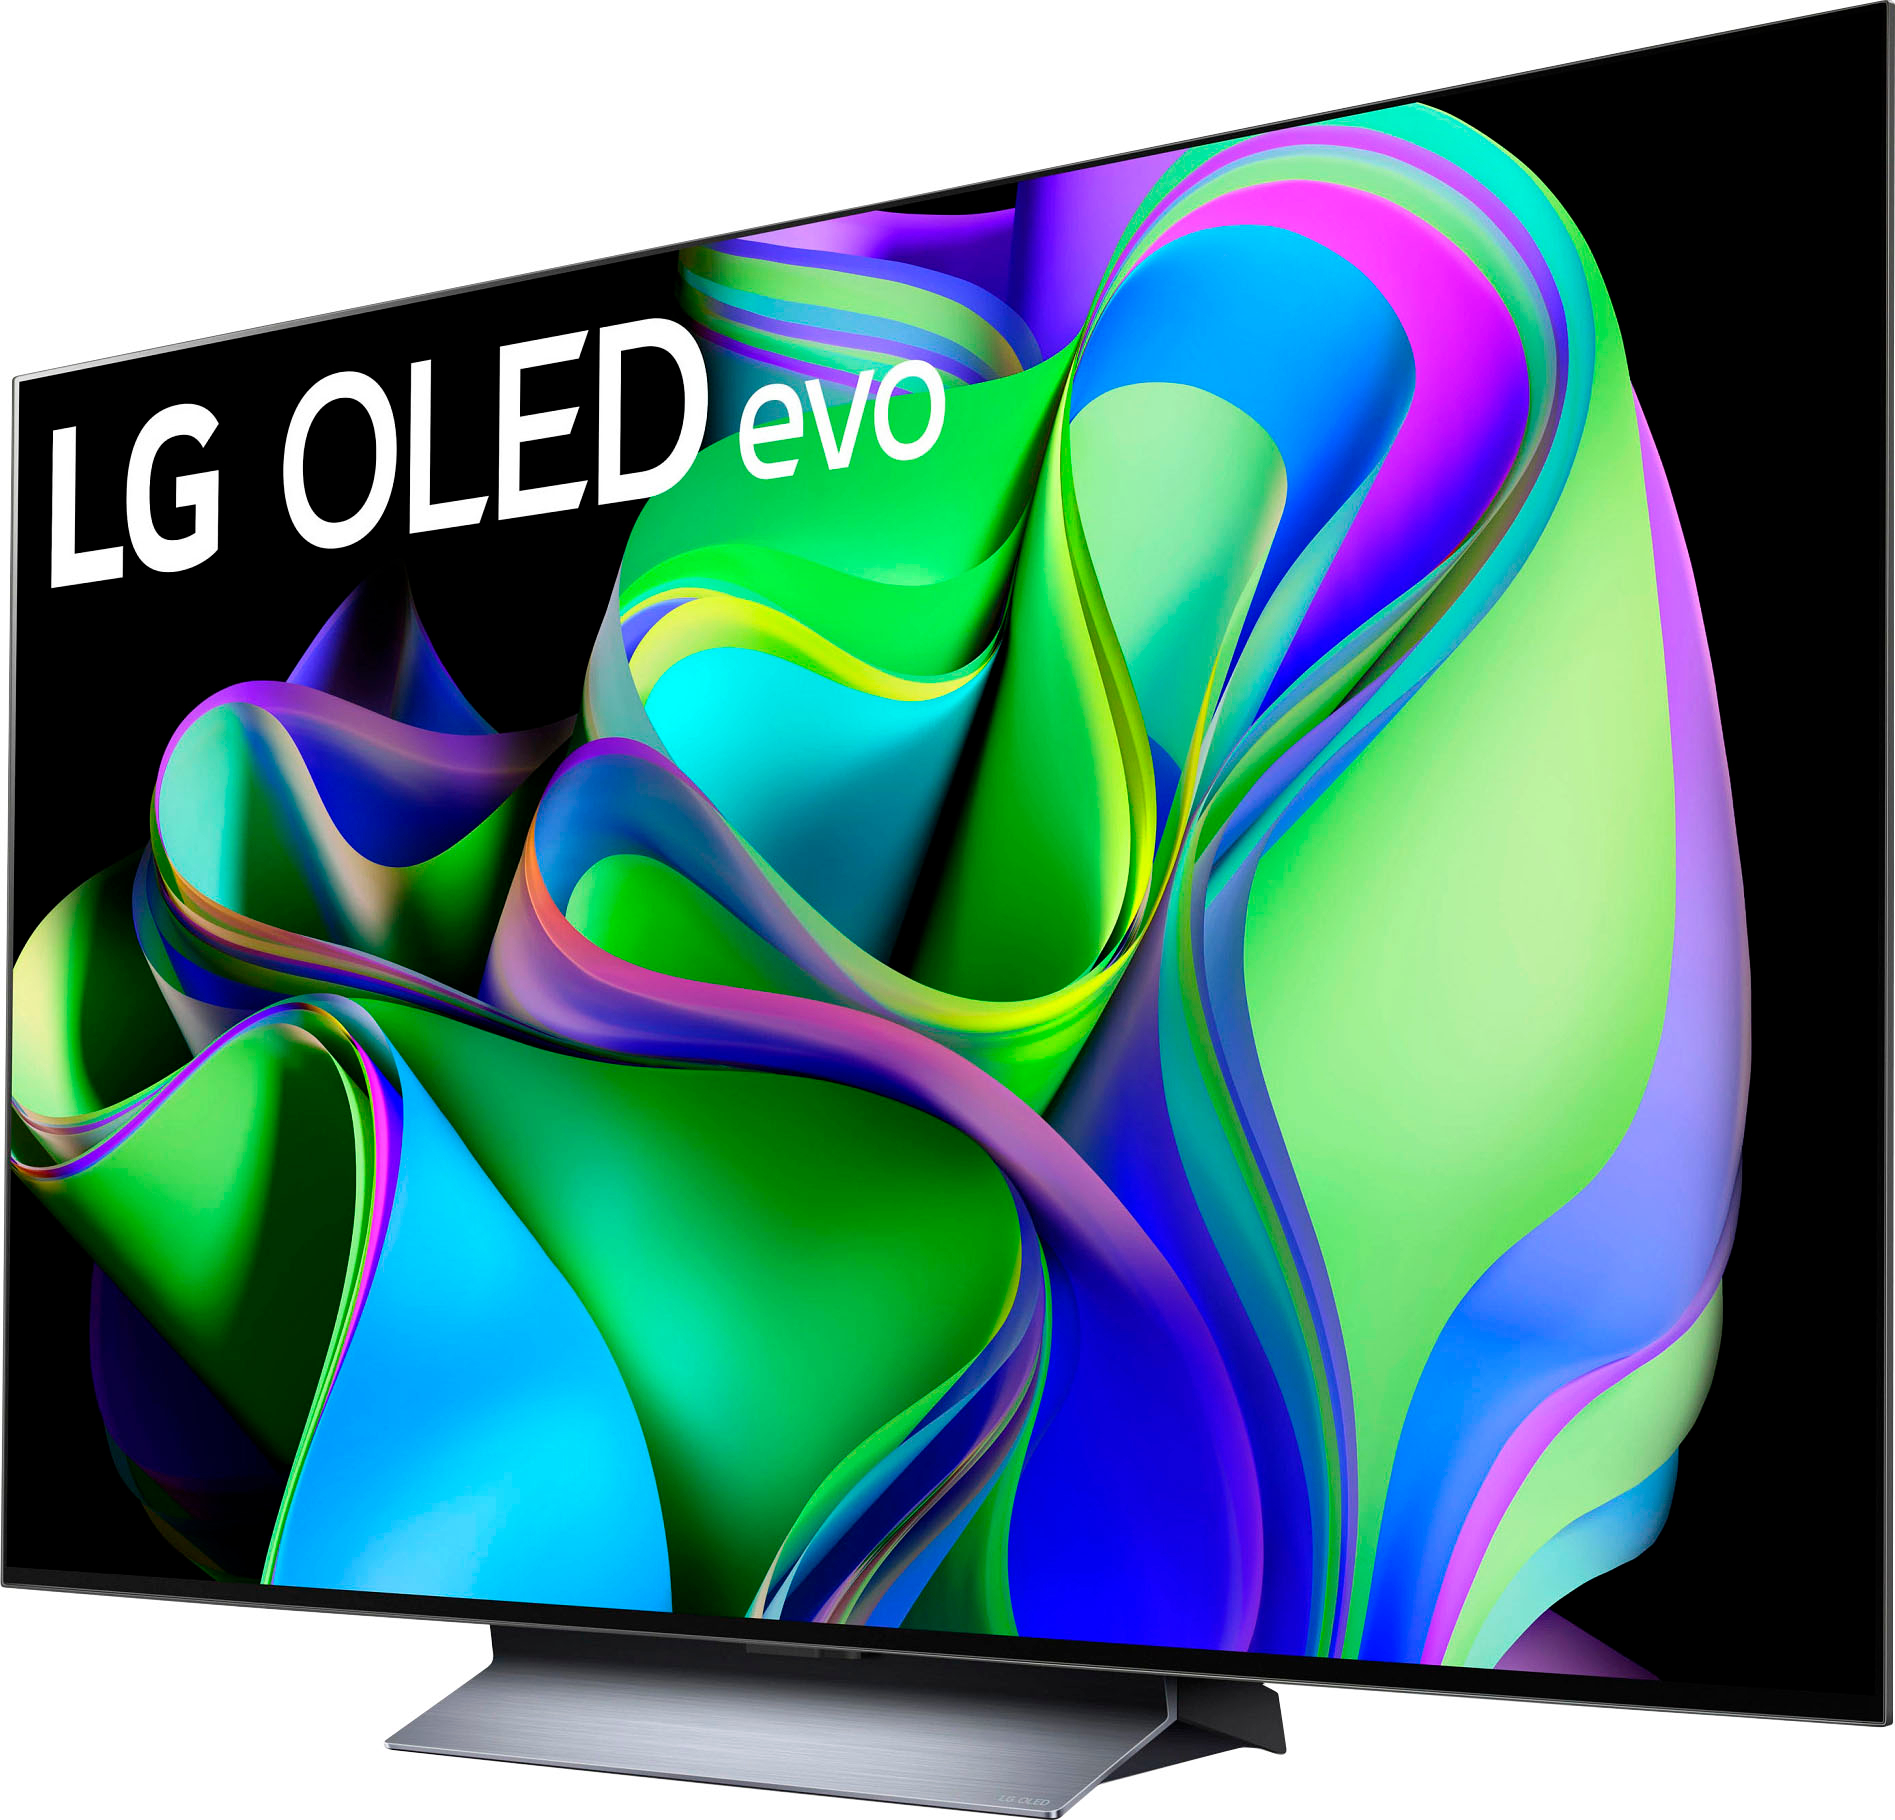 LG OLED55C9PUA 55 OLED 4K Smart TV with WiSA for sale online